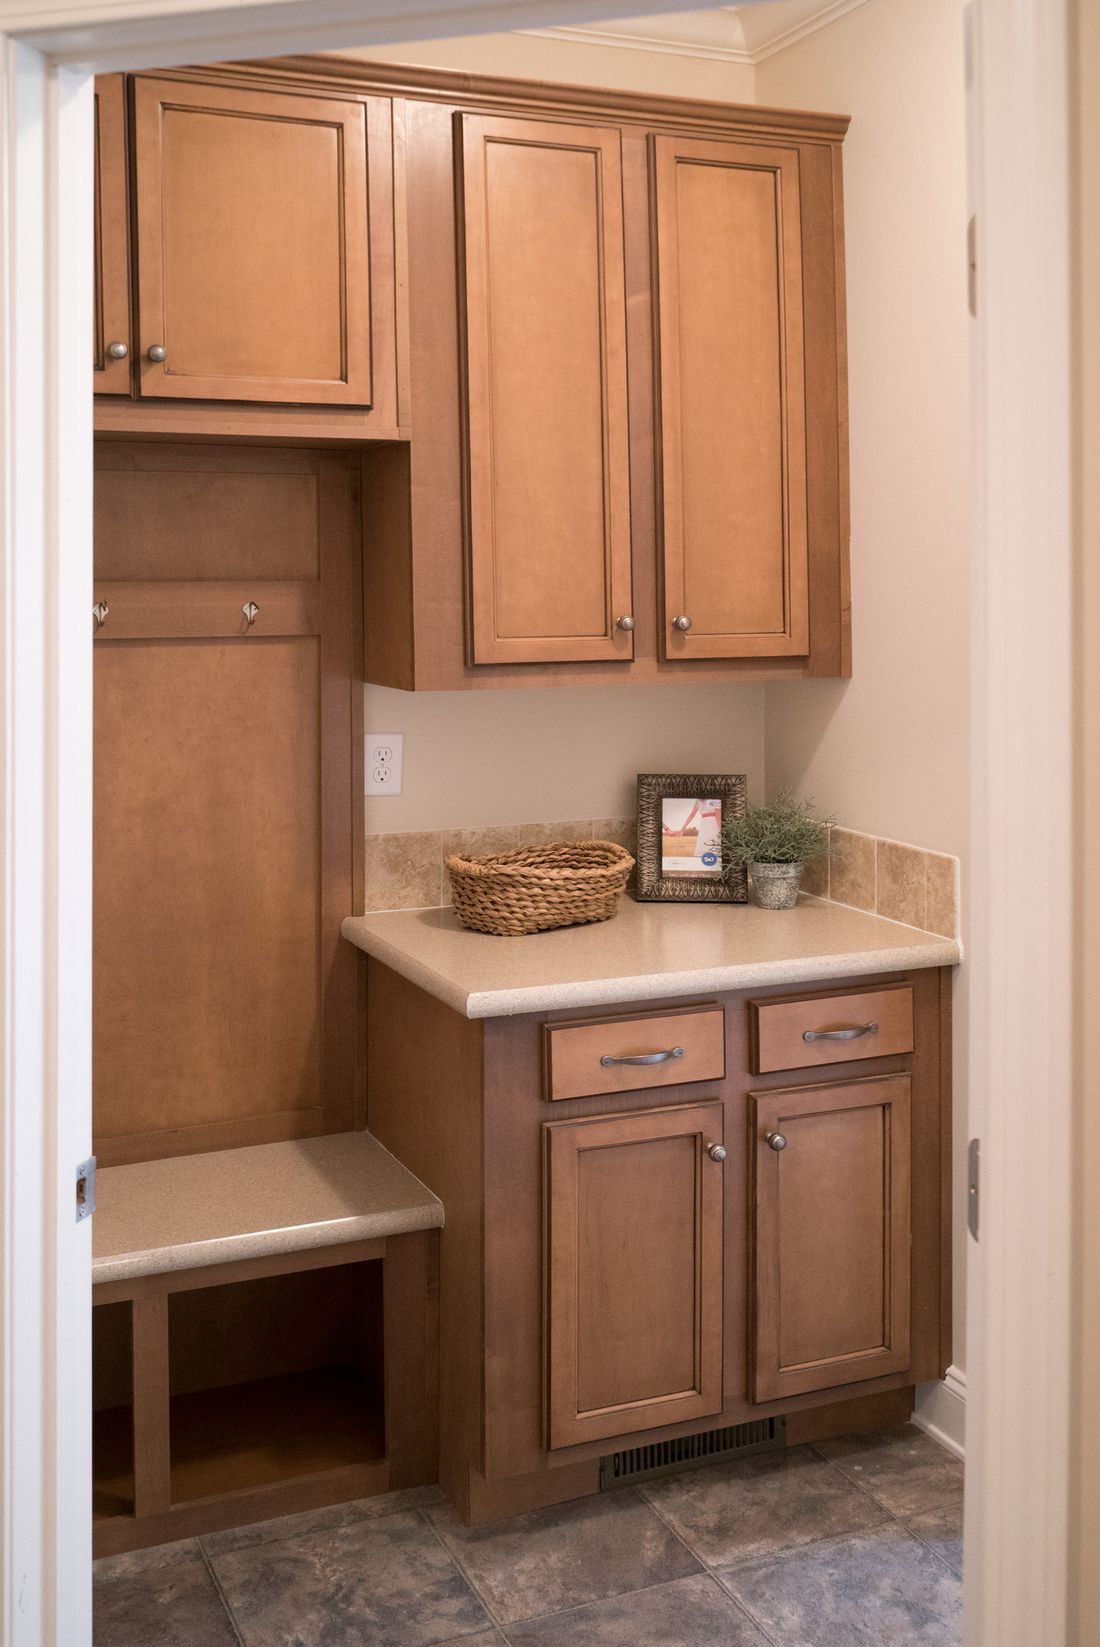 The 1545 JAMESTOWN Utility Room. This Manufacture Home features 3 bedrooms and 2 baths.